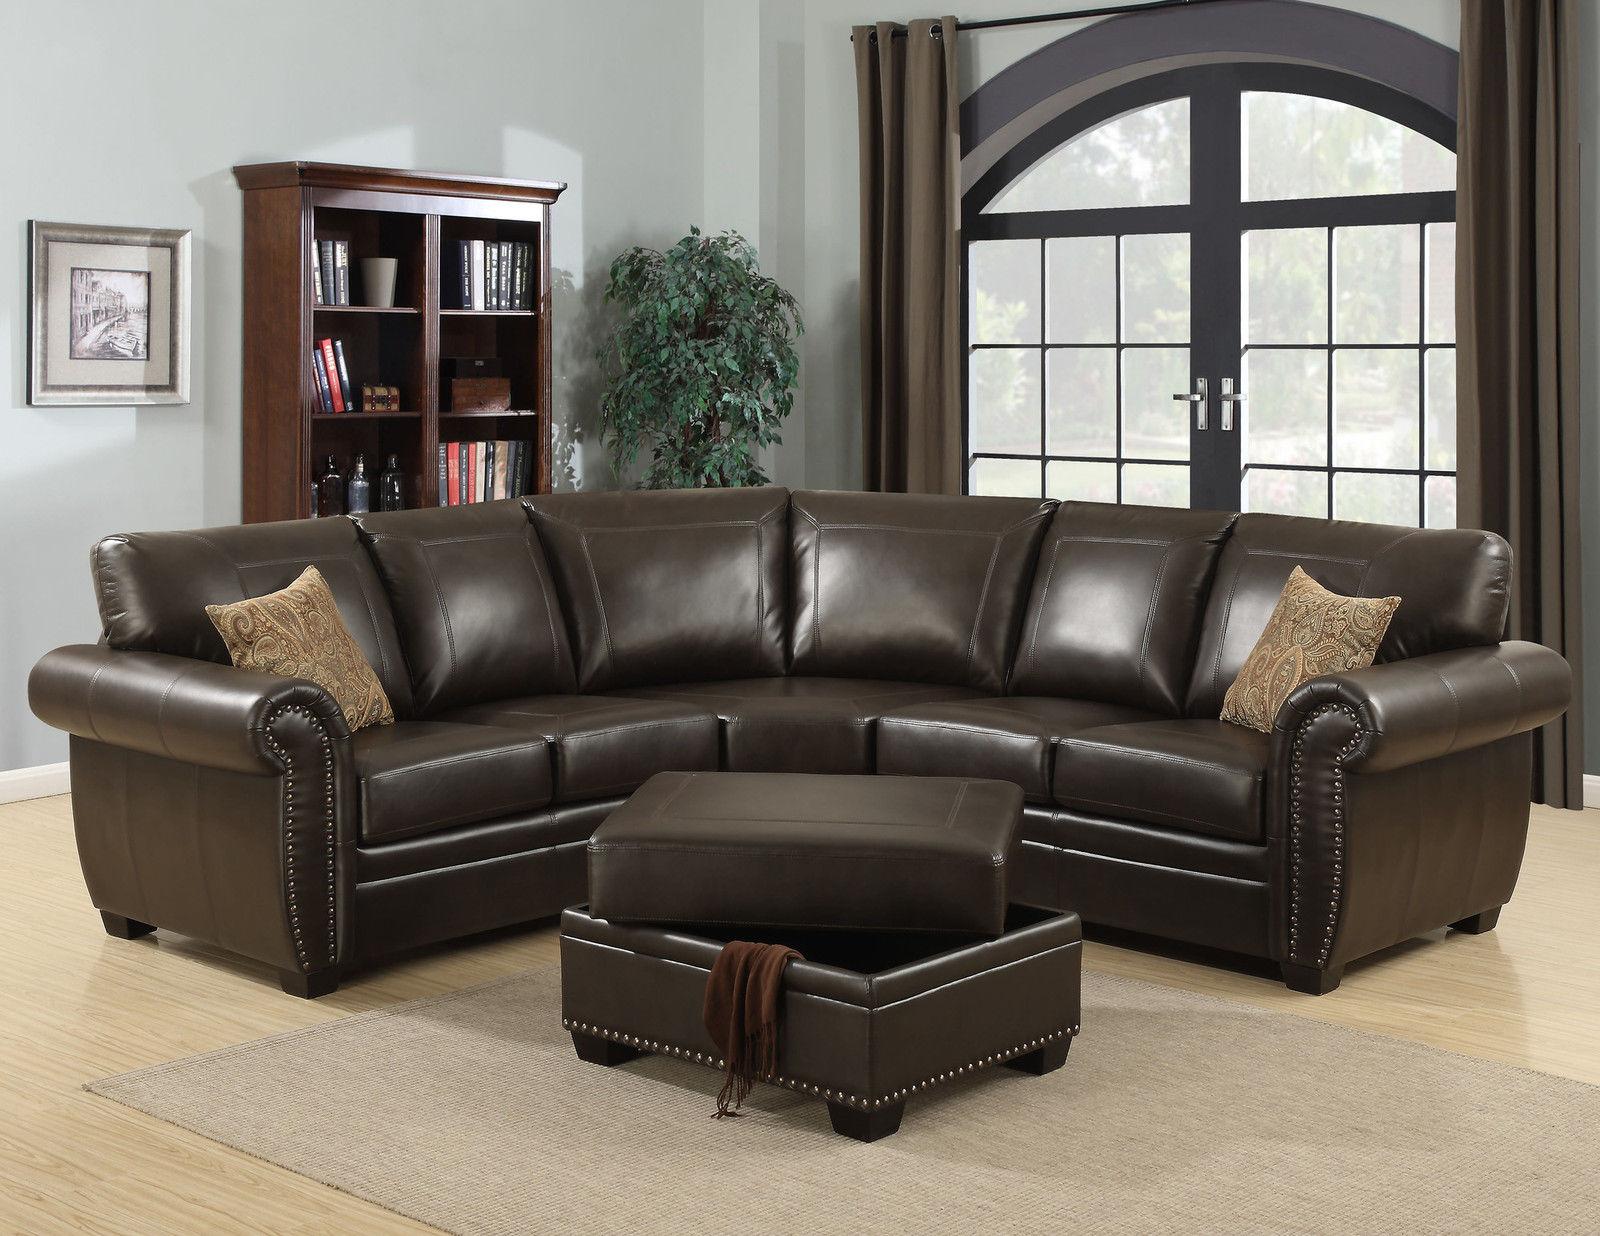 Contemporary Sectional Sofa and Ottoman Louis LOUIS-BRN-4PC-SECTIONAL in Dark Brown leather gel